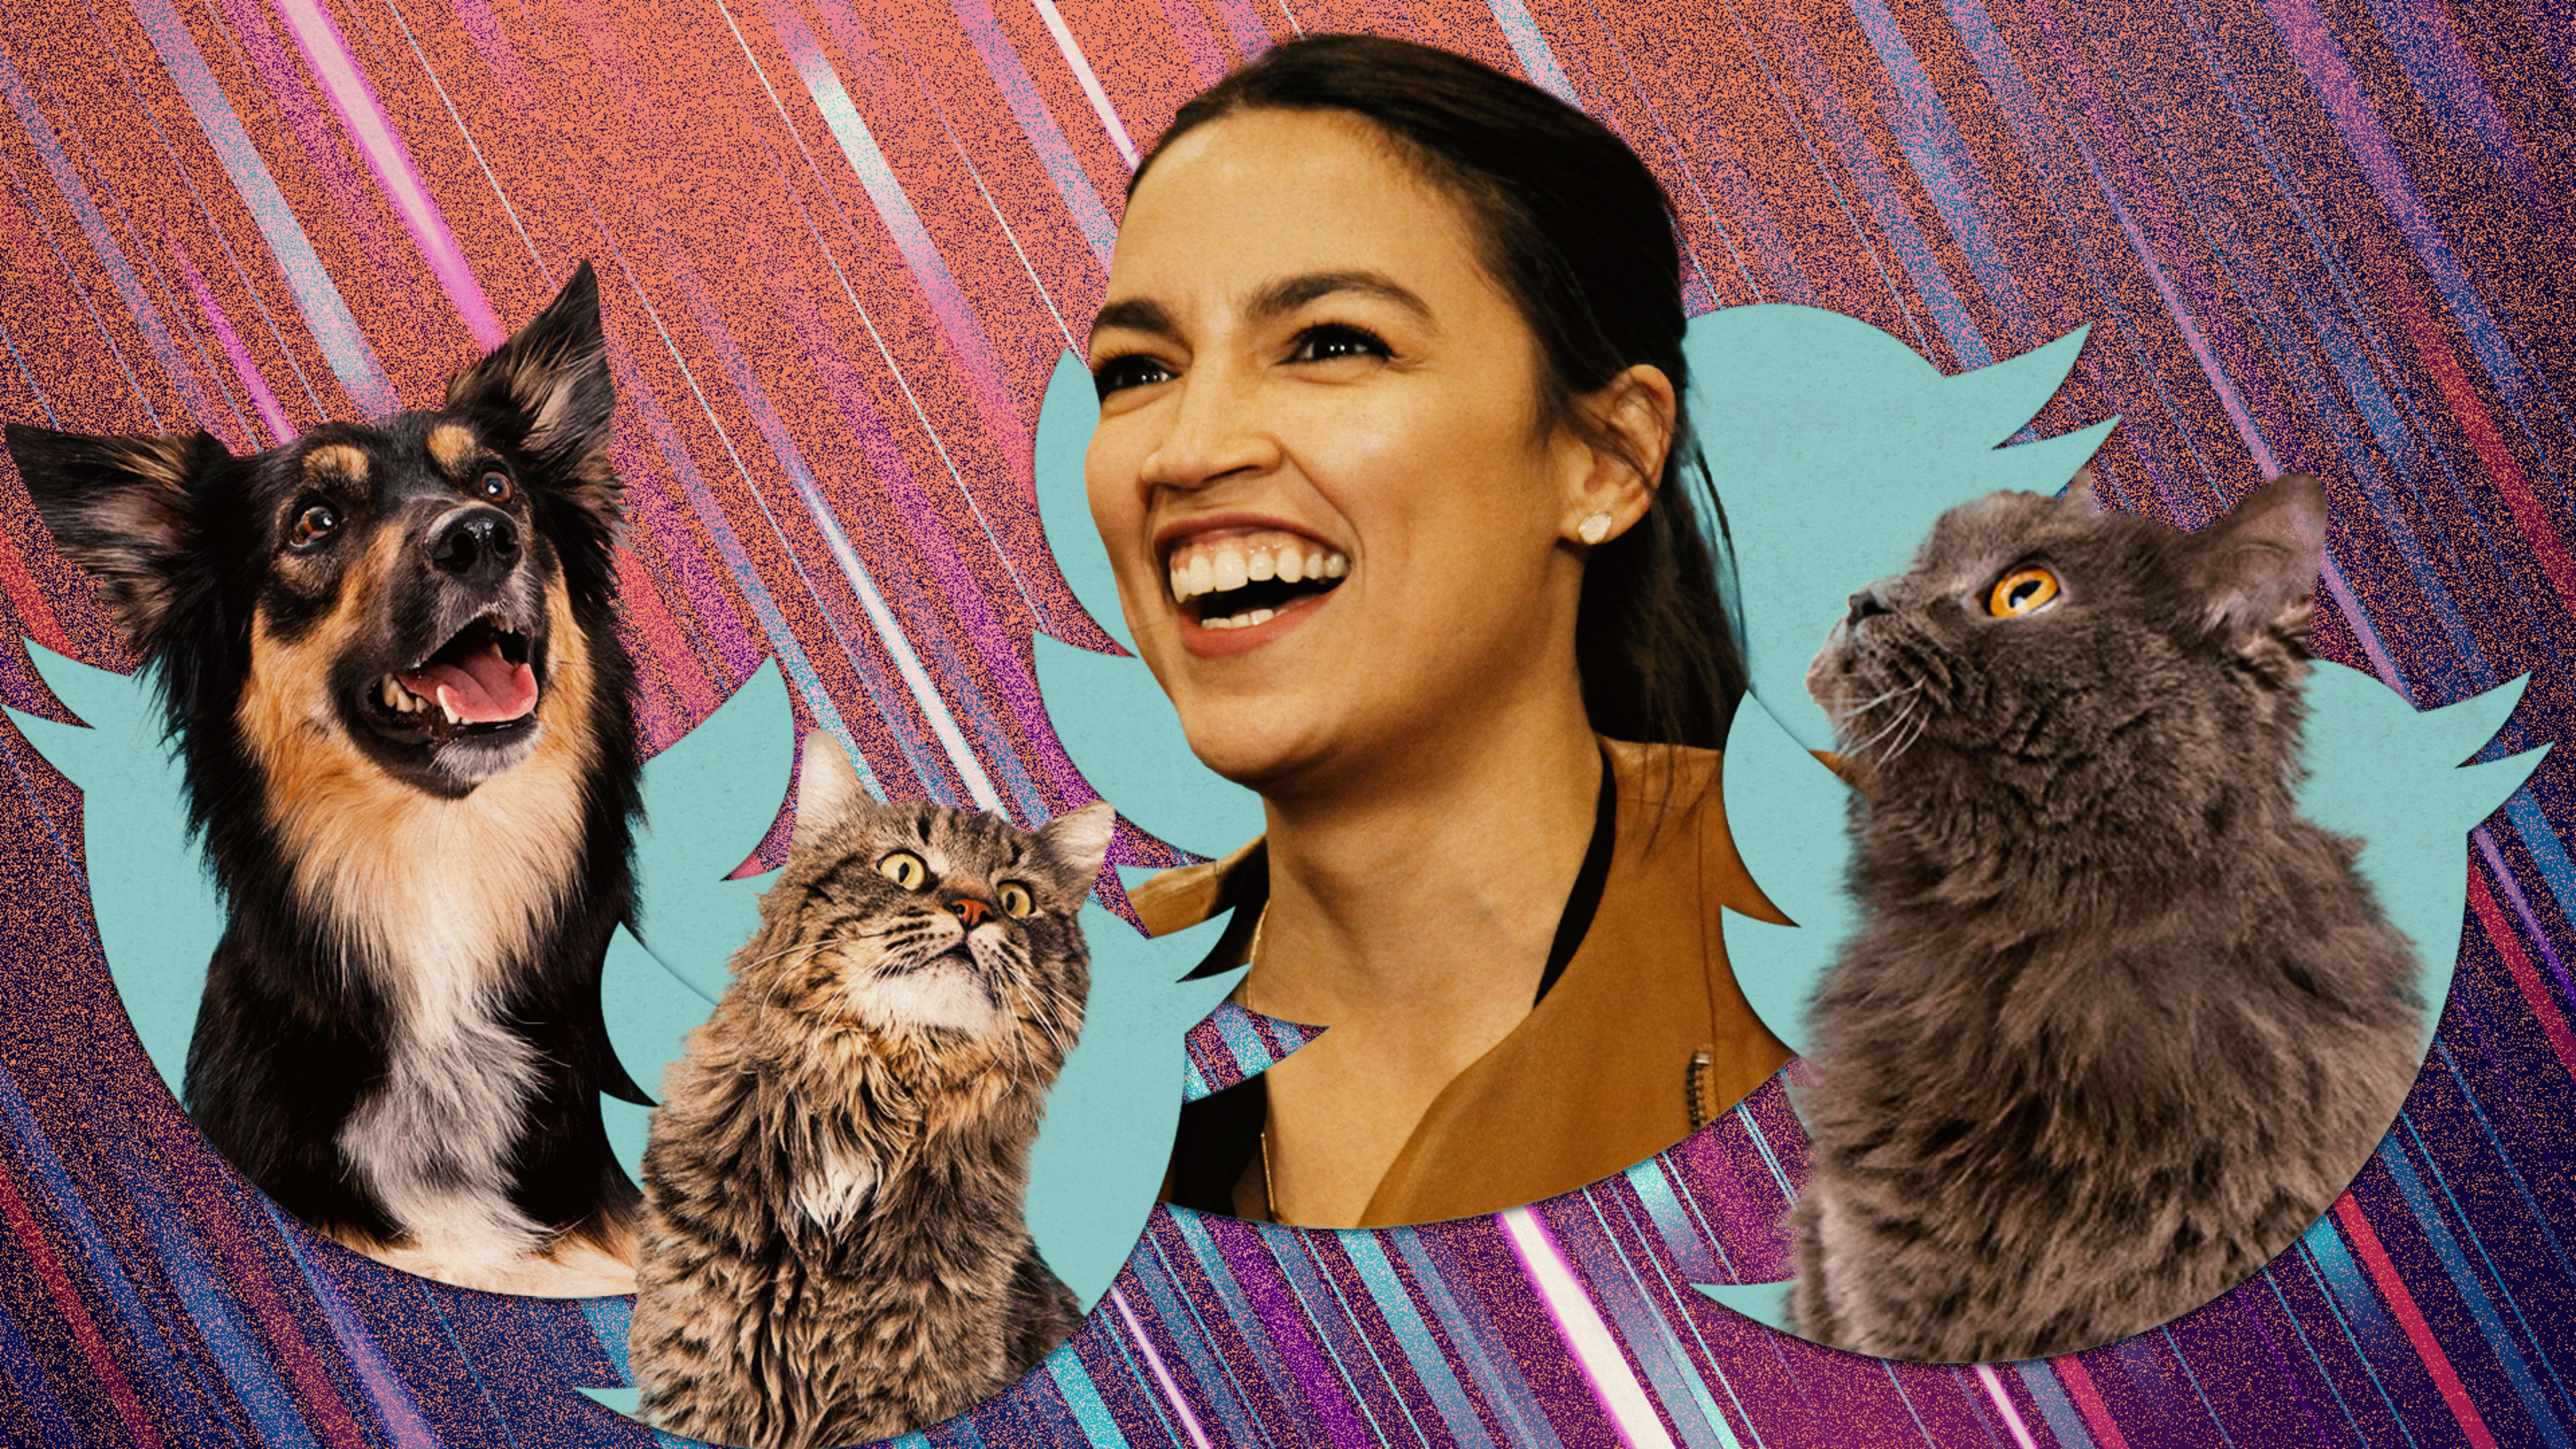 Twitter trolls tried to come for AOC. Their hashtag got taken over by adorable pet pics